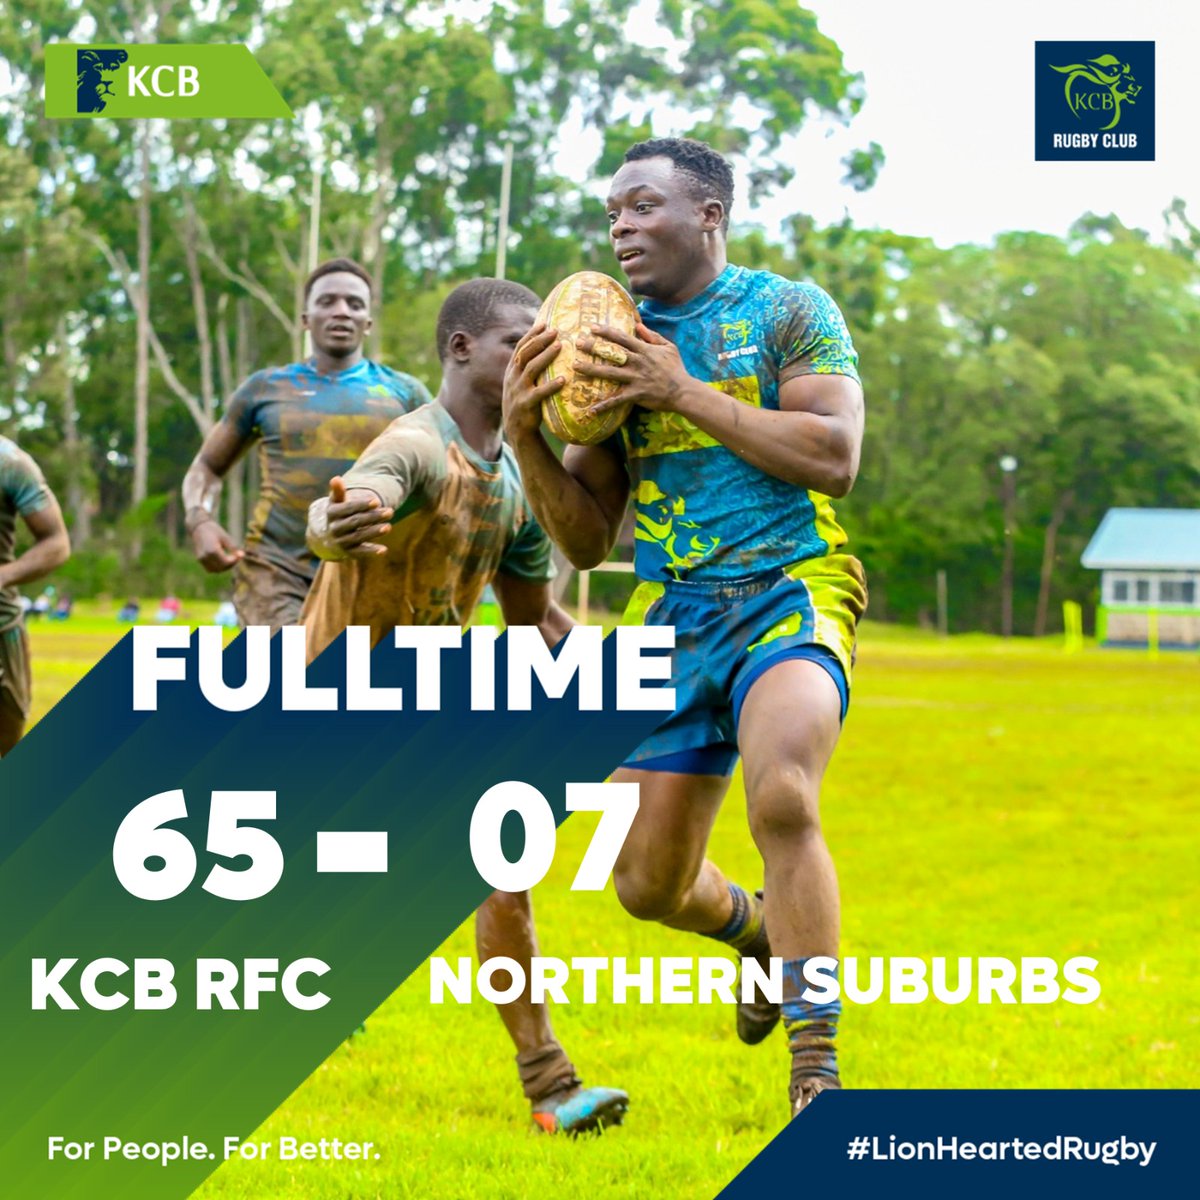 Congratulations to the entire team for showcasing sheer brilliance and teamwork out there! Keep up the good work! 🏆

#LionHeartedRugby #KCBNiYetu